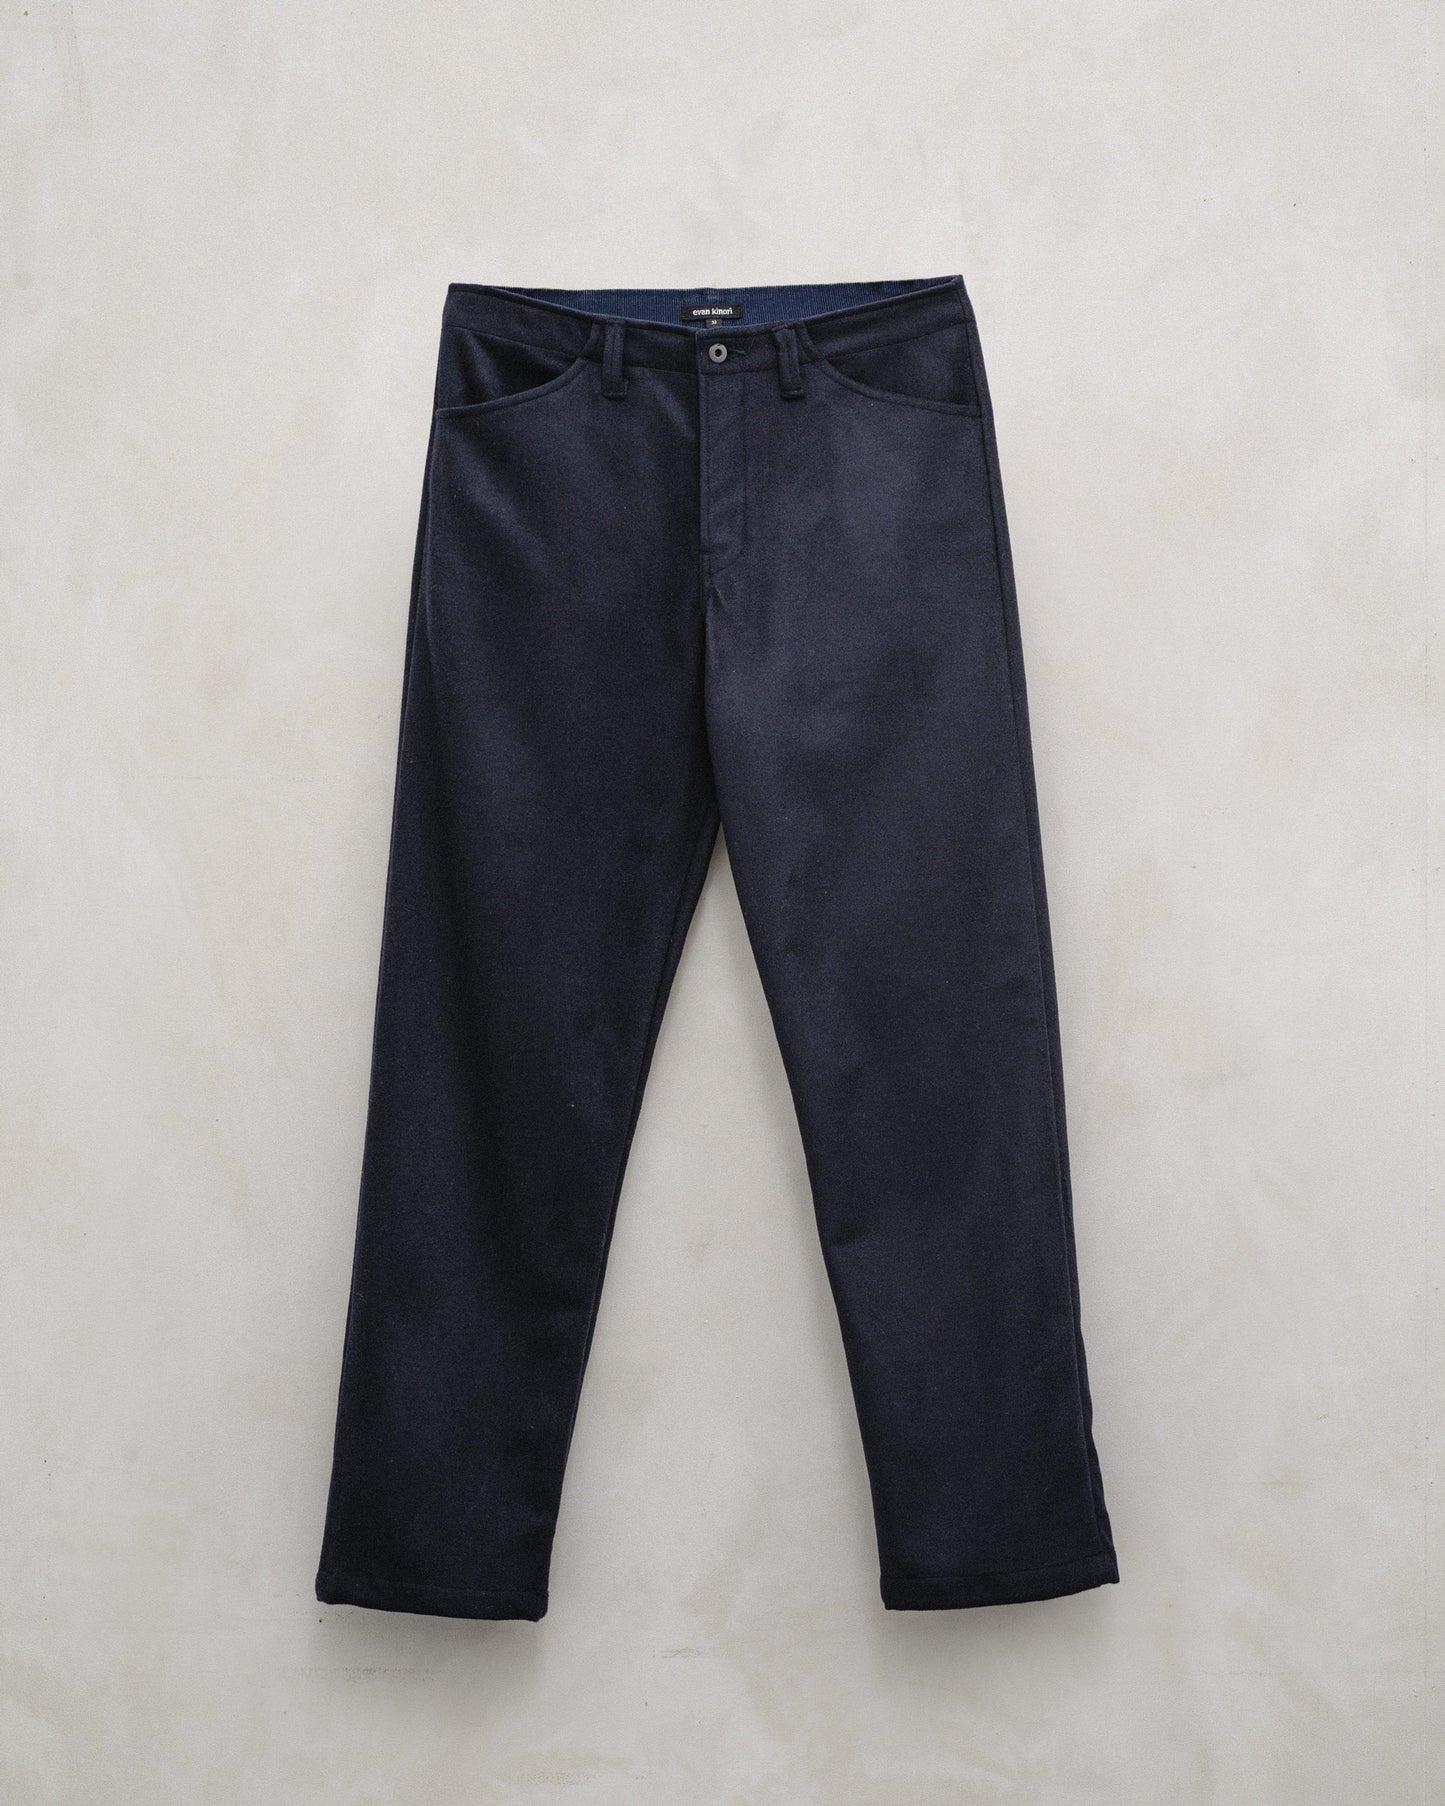 Four Pocket Pant - Brushed Wool/Cashmere Flannel, Navy